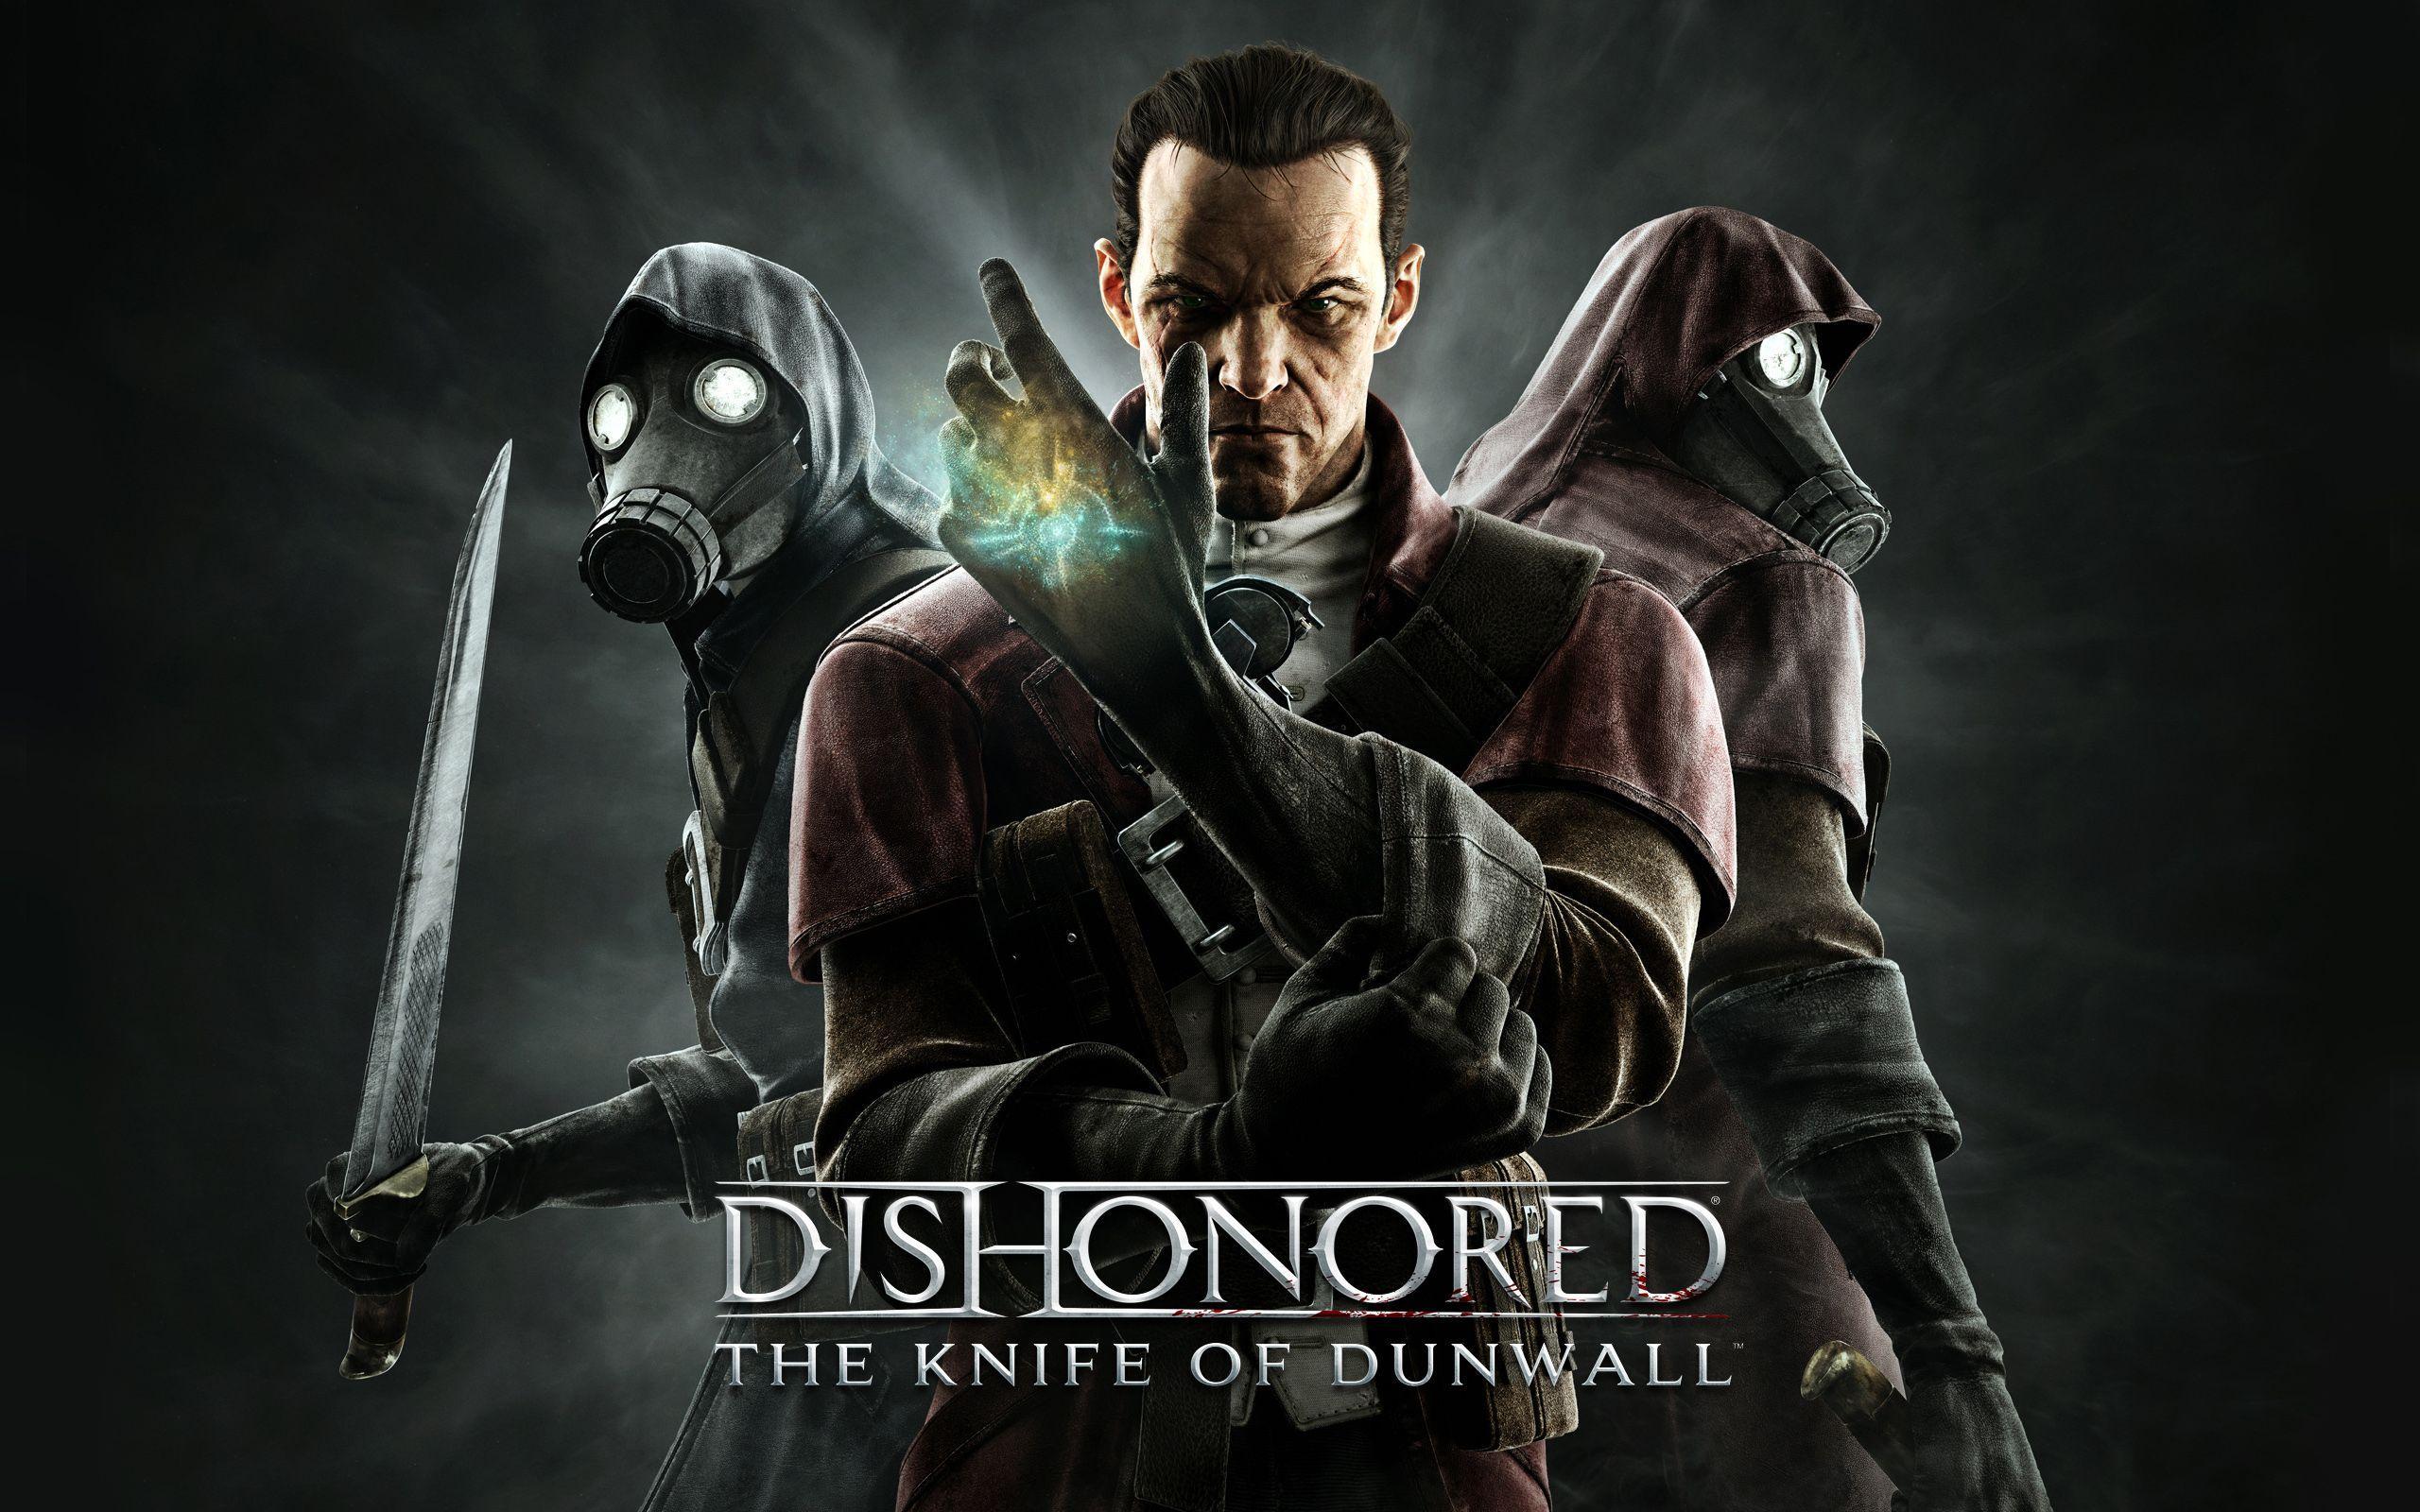 Wallpaper Tagged With DISHONORED. DISHONORED HD Wallpaper